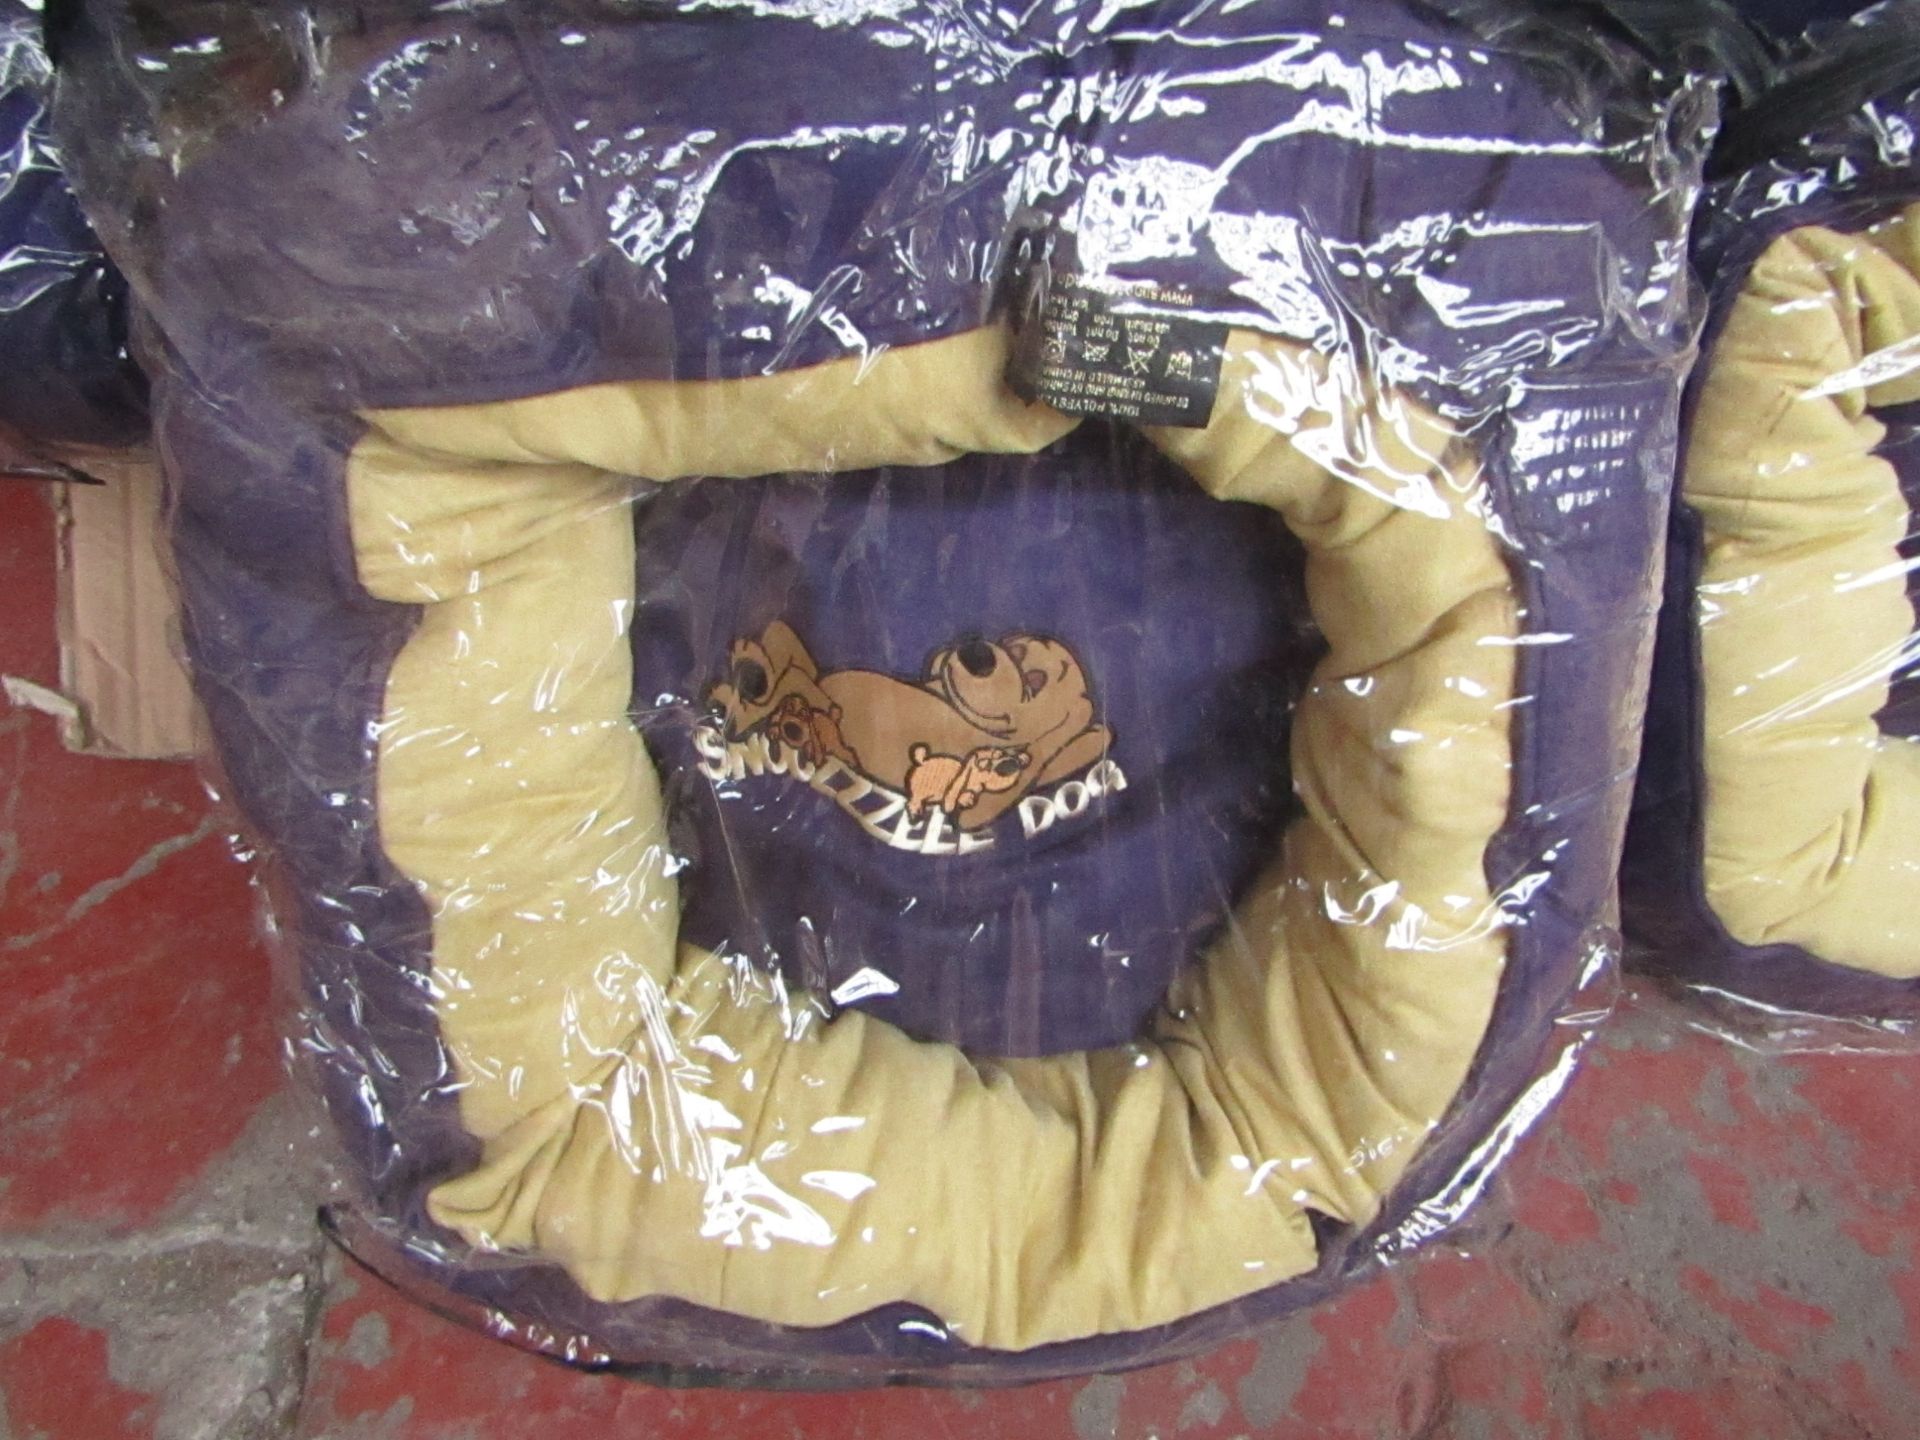 10x Snoozzzeee Dog - Purple Donut Dog Bed (20") - All New & Packaged.